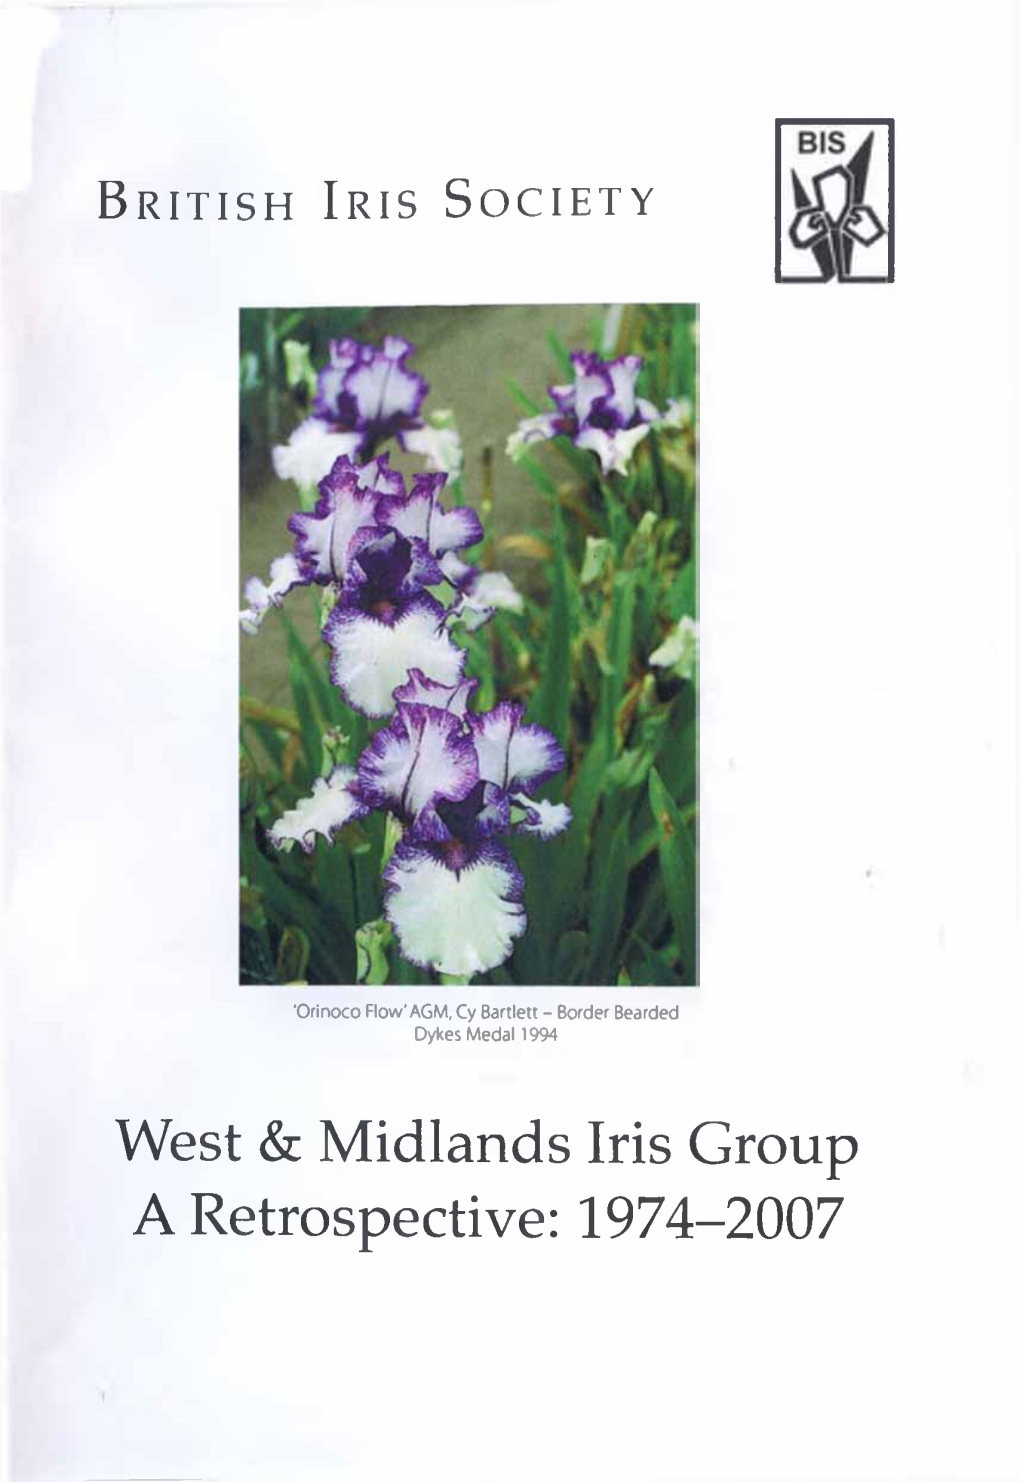 A Retrospective: 1974-2007 'Dinky Dinah', Pat Foster - Arilbred Registered 1987 a RETROSPECTIVE Thirty-Three Years of the West & Midlands Iris Group